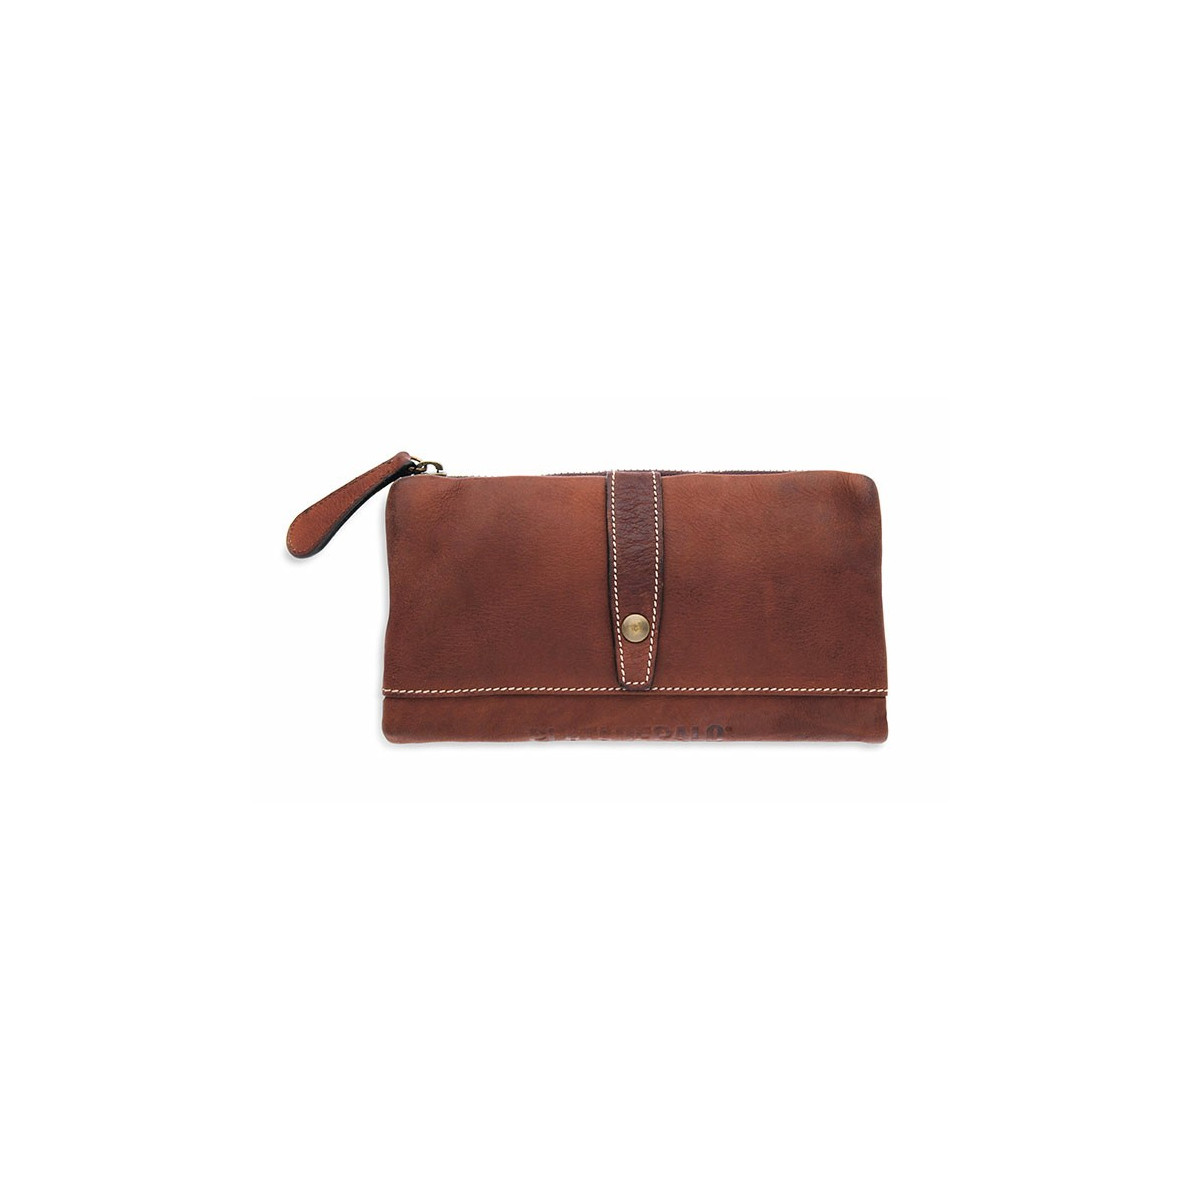 BROWN LEATHER WALLET - ACC72